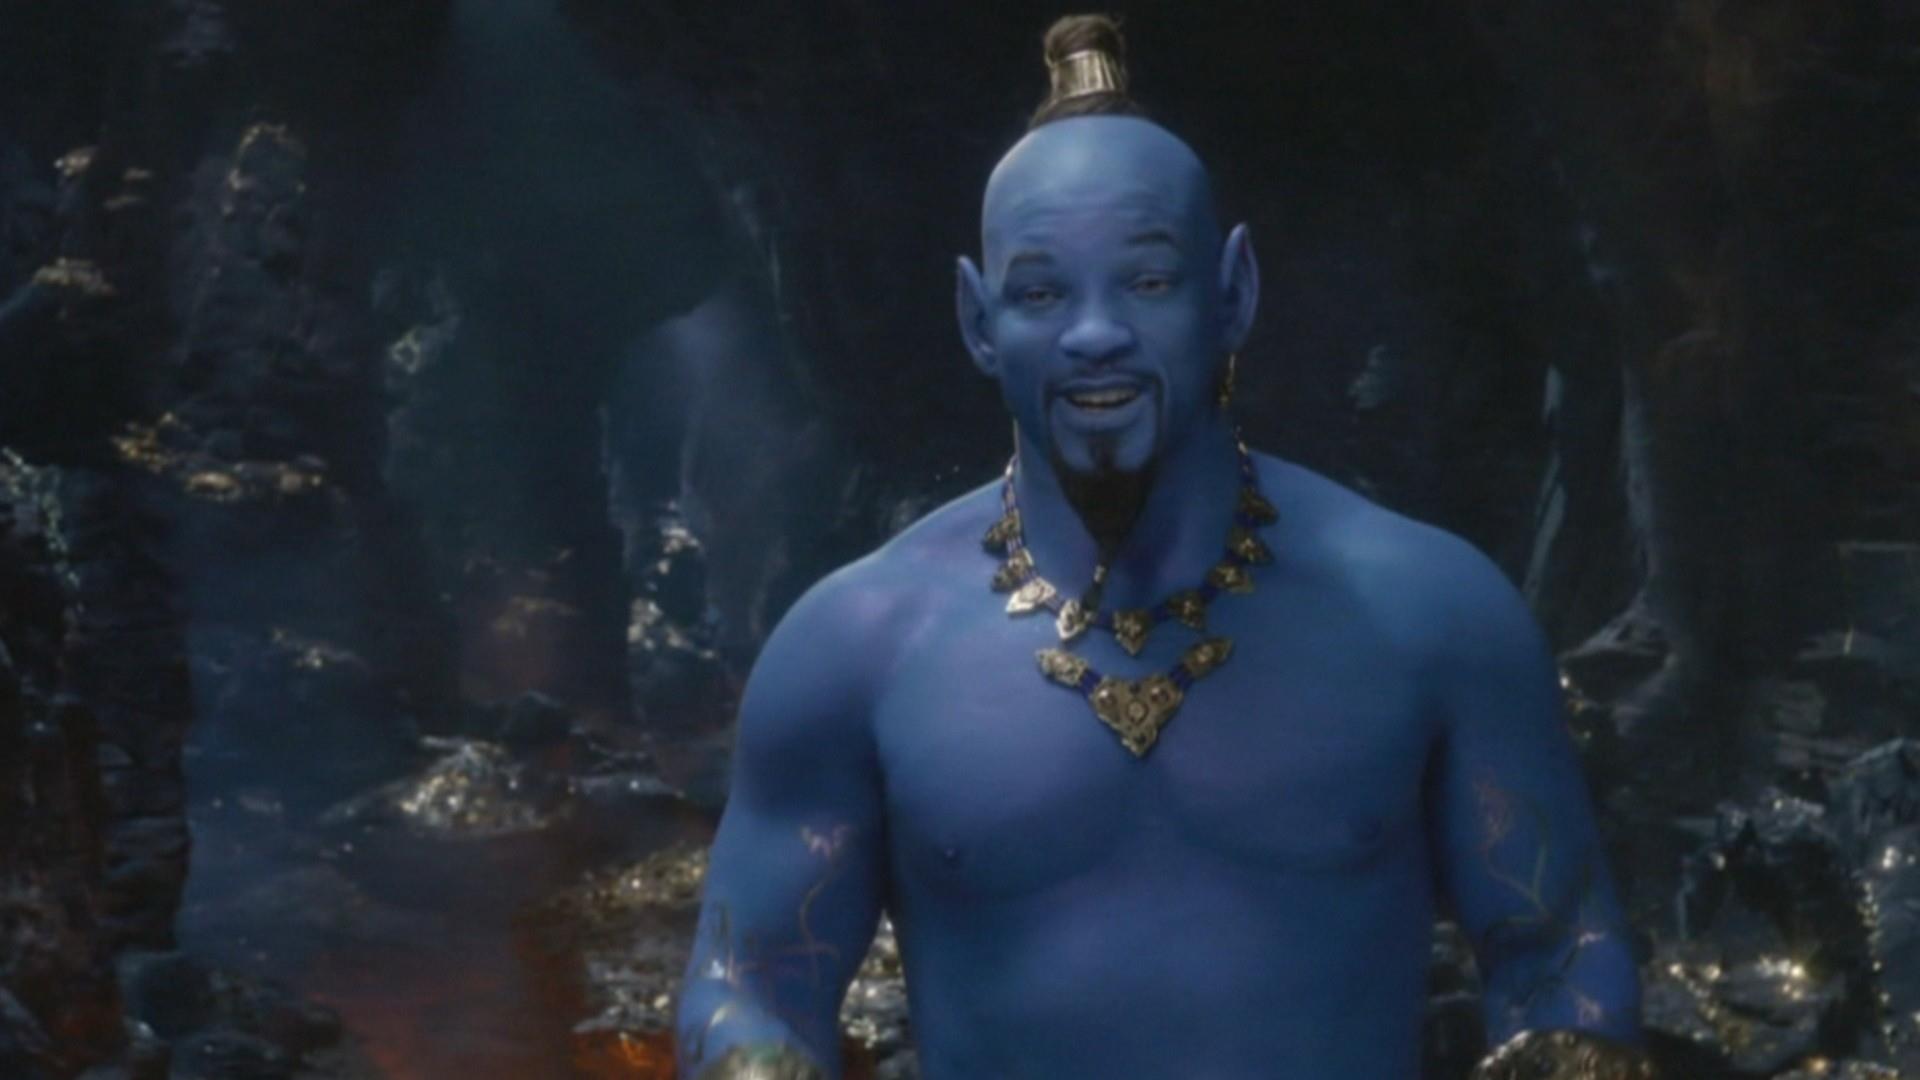 New Live Action Aladdin Trailer Reveals Blue Will Smith Genie This Is Real Geek Outpost